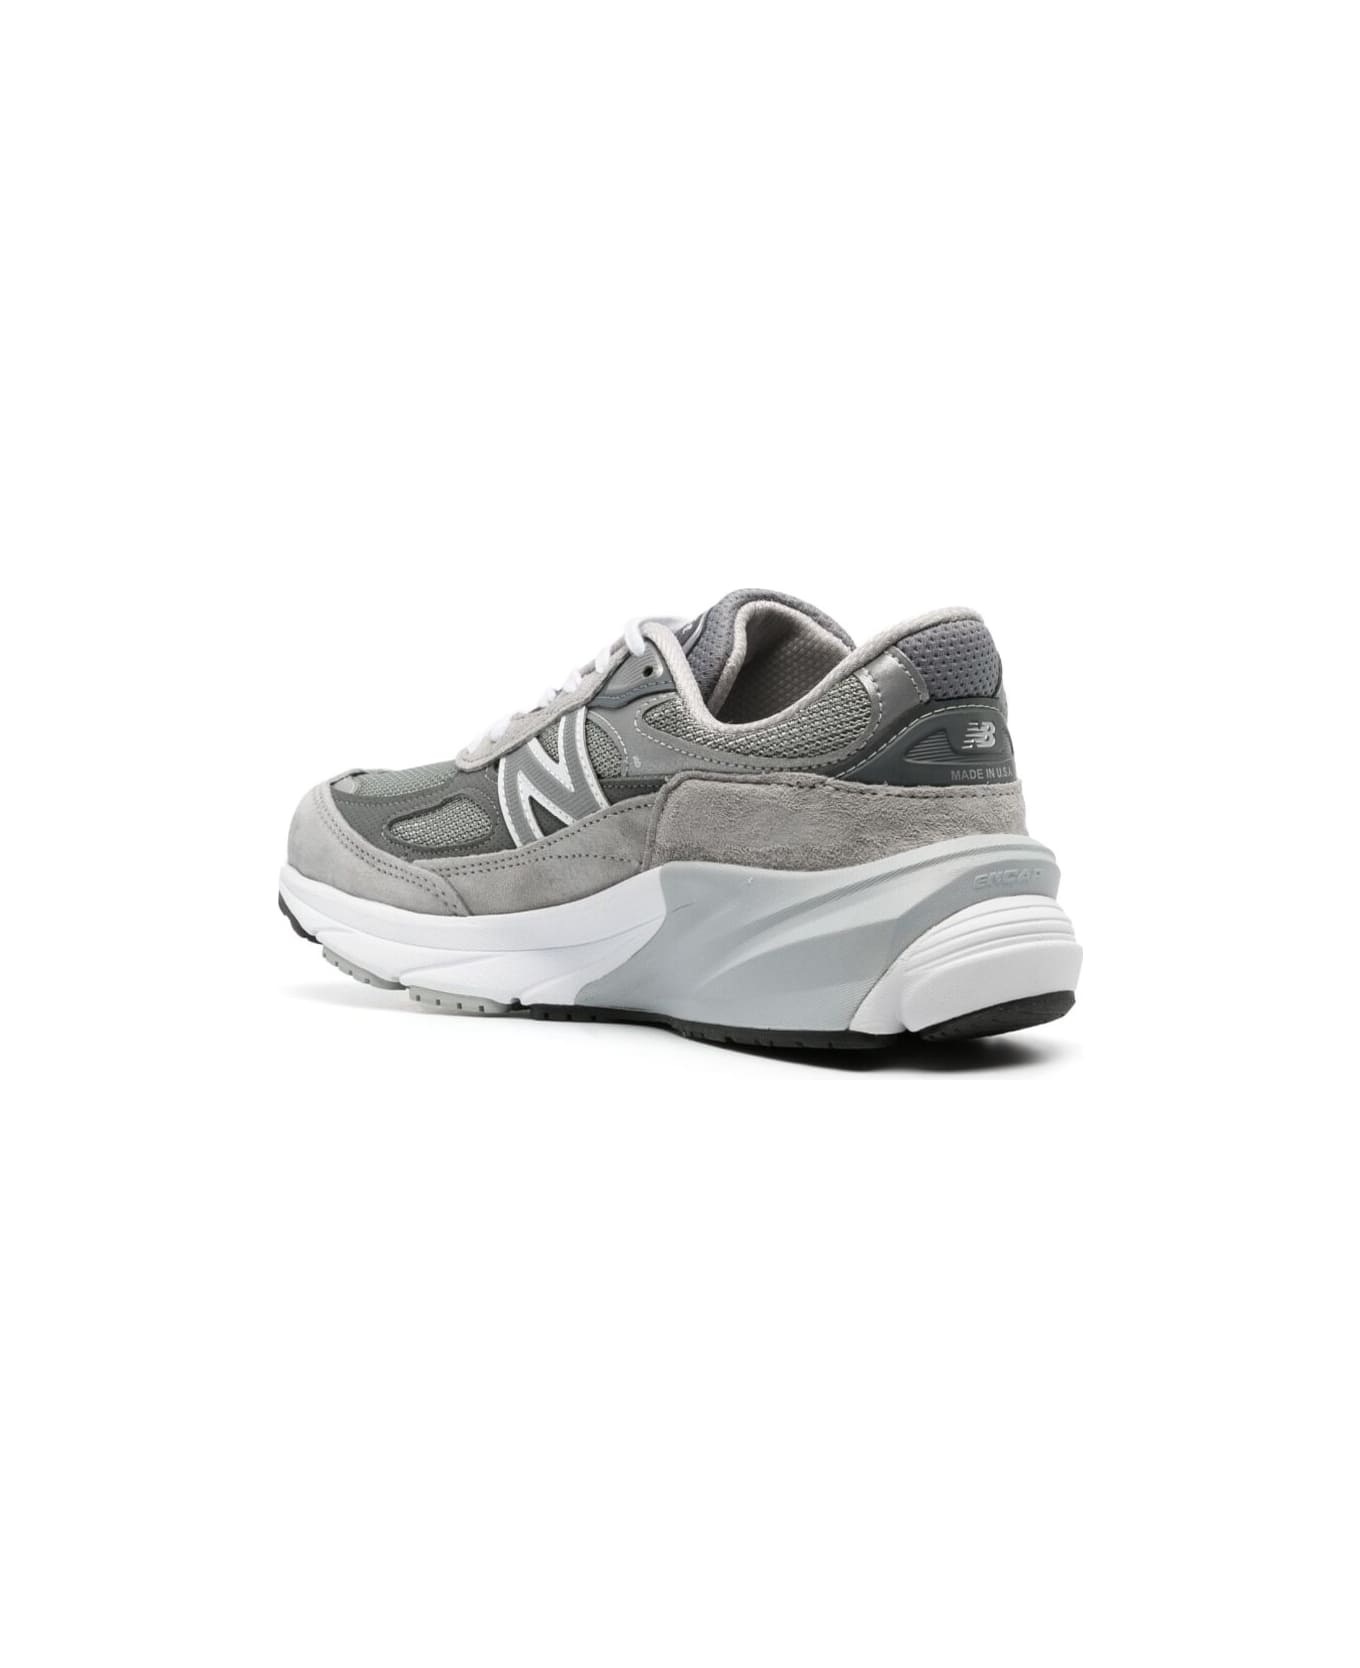 New Balance '990 V6' Grey Low Top Sneakers With Logo Details In Tech Materials Woman - GREY